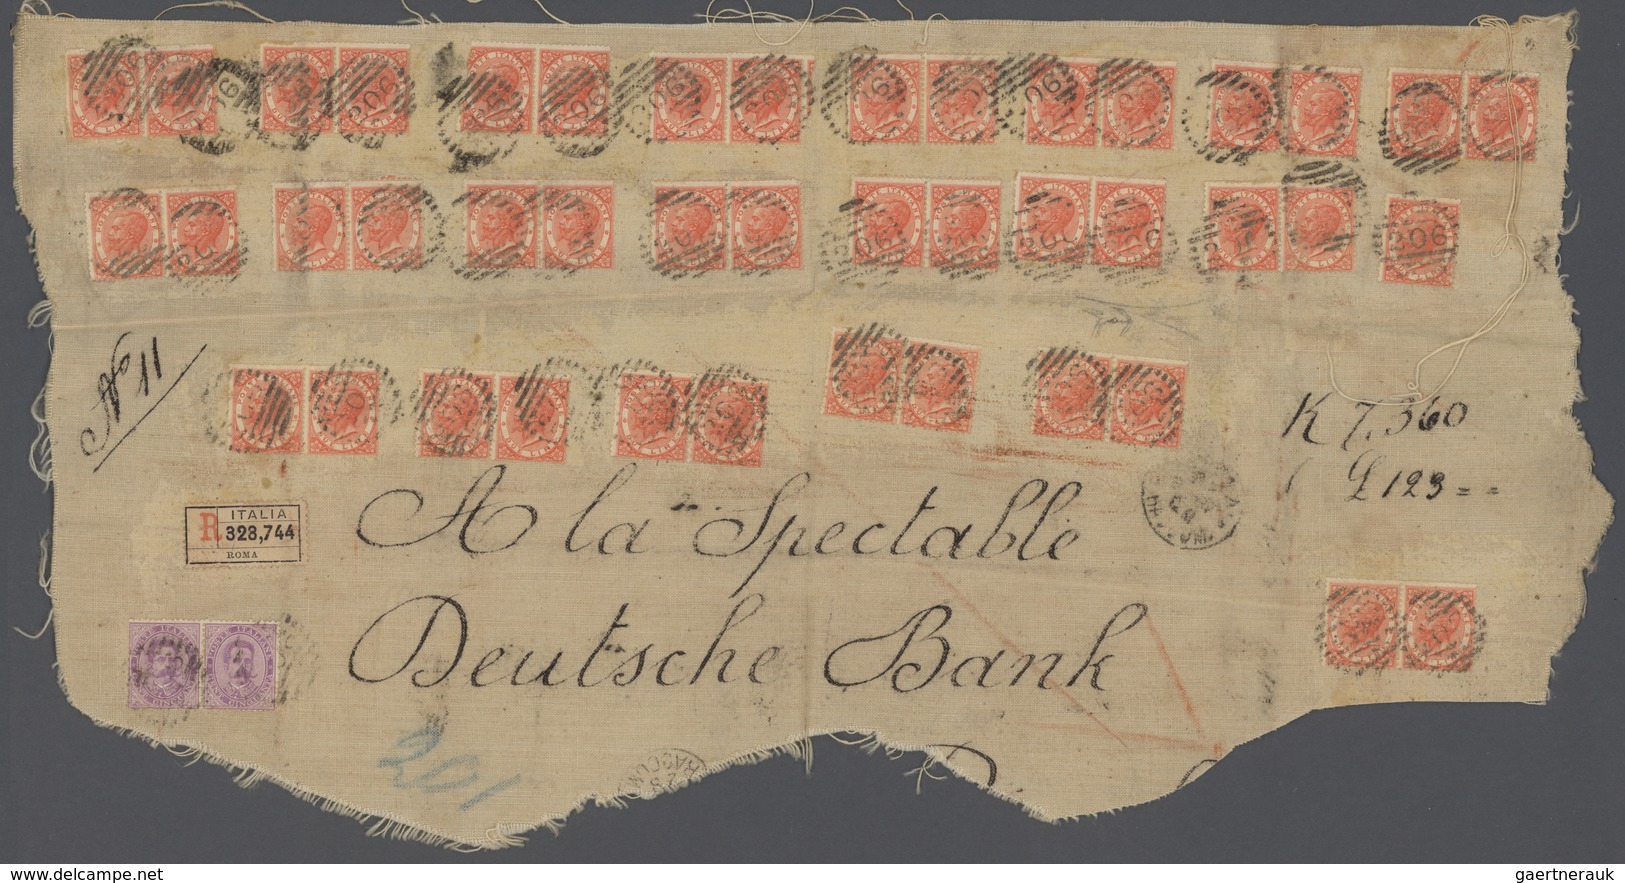 00944 Italien: 1887 Huge Piece  Of A Registered, Insured Letter Send From Rome To Germany. The Item Weight - Poststempel